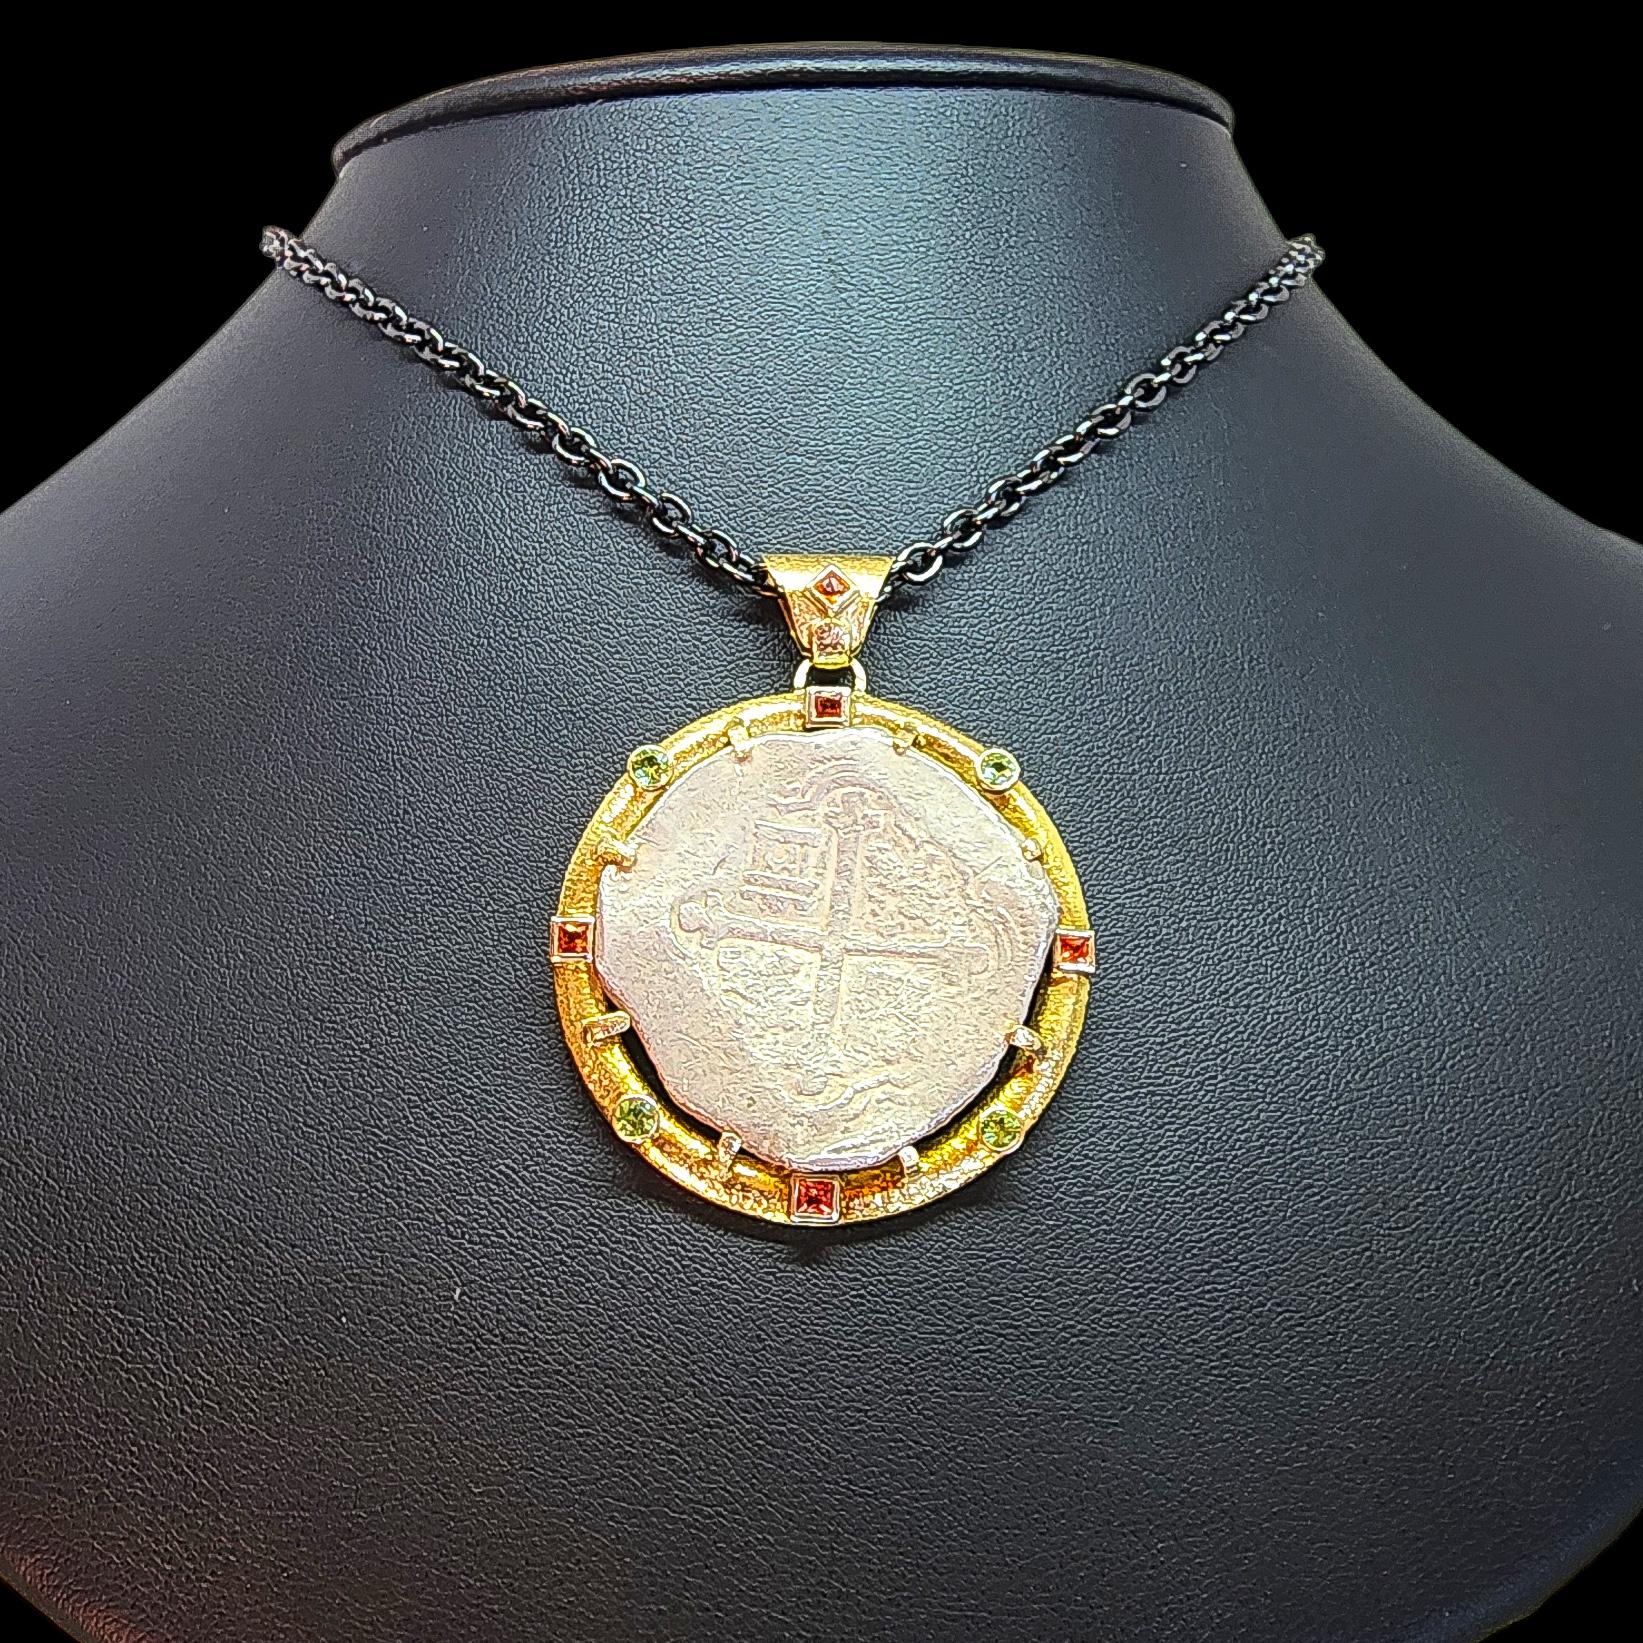 One of a Kind, Entirely Hand Made, Men's Ancient Coin Pendant with Sapphires and Tsavorite Garnets.
The Pendant is crafted in solid 18K Yellow Gold and features as its center piece, an authentic (Certified by the Numismatic Guaranty Corporation),